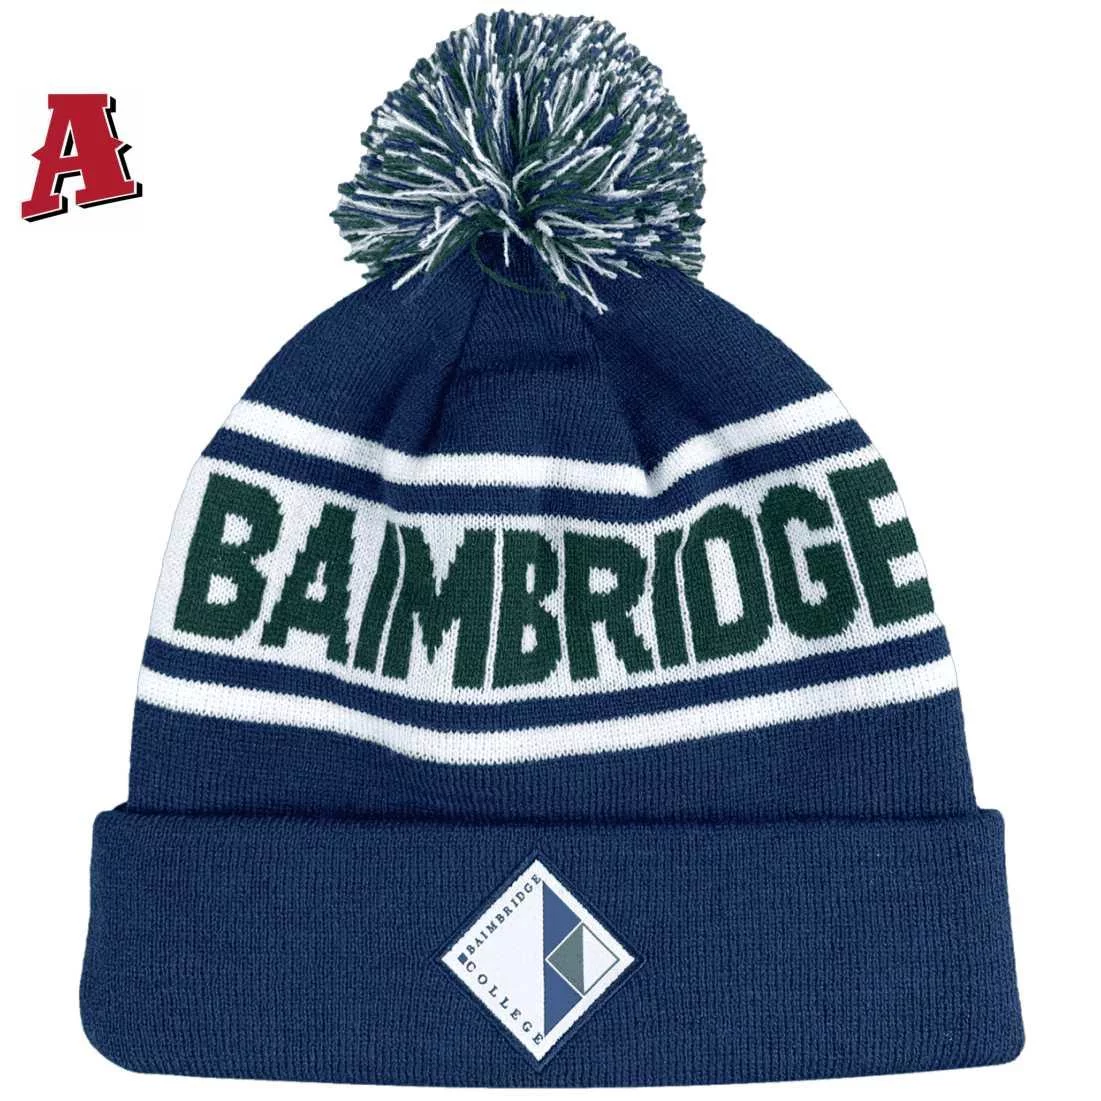 Baimbridge College Hamilton VIC Aussie Beanie Long LIne or Roll-up Cuff with Pom Pom available in any Colourway